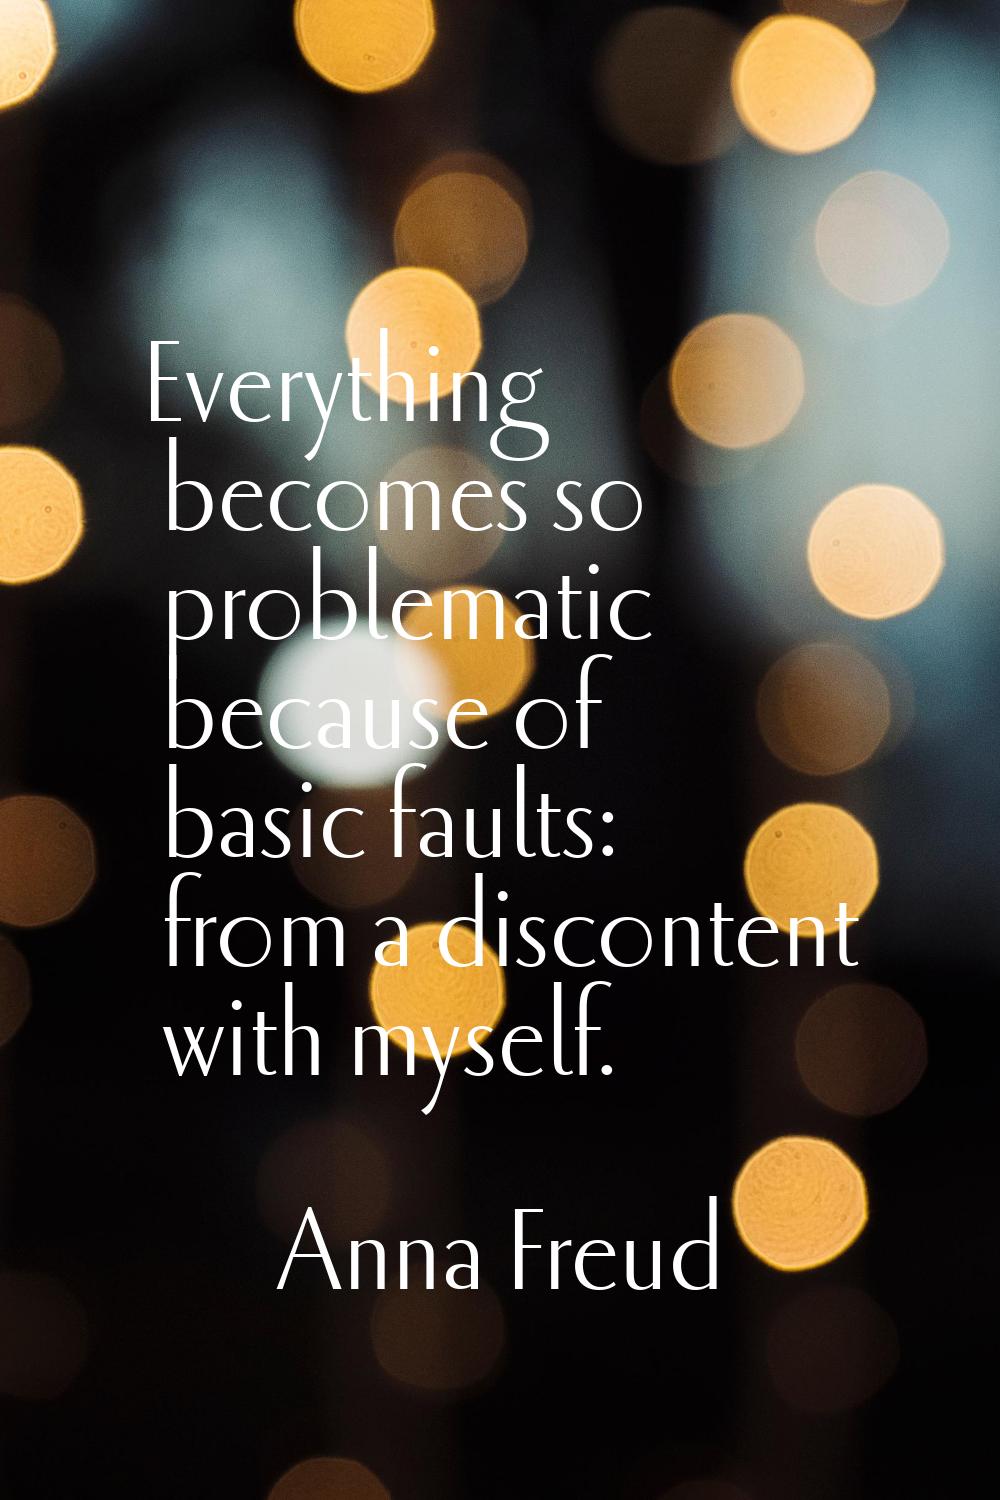 Everything becomes so problematic because of basic faults: from a discontent with myself.